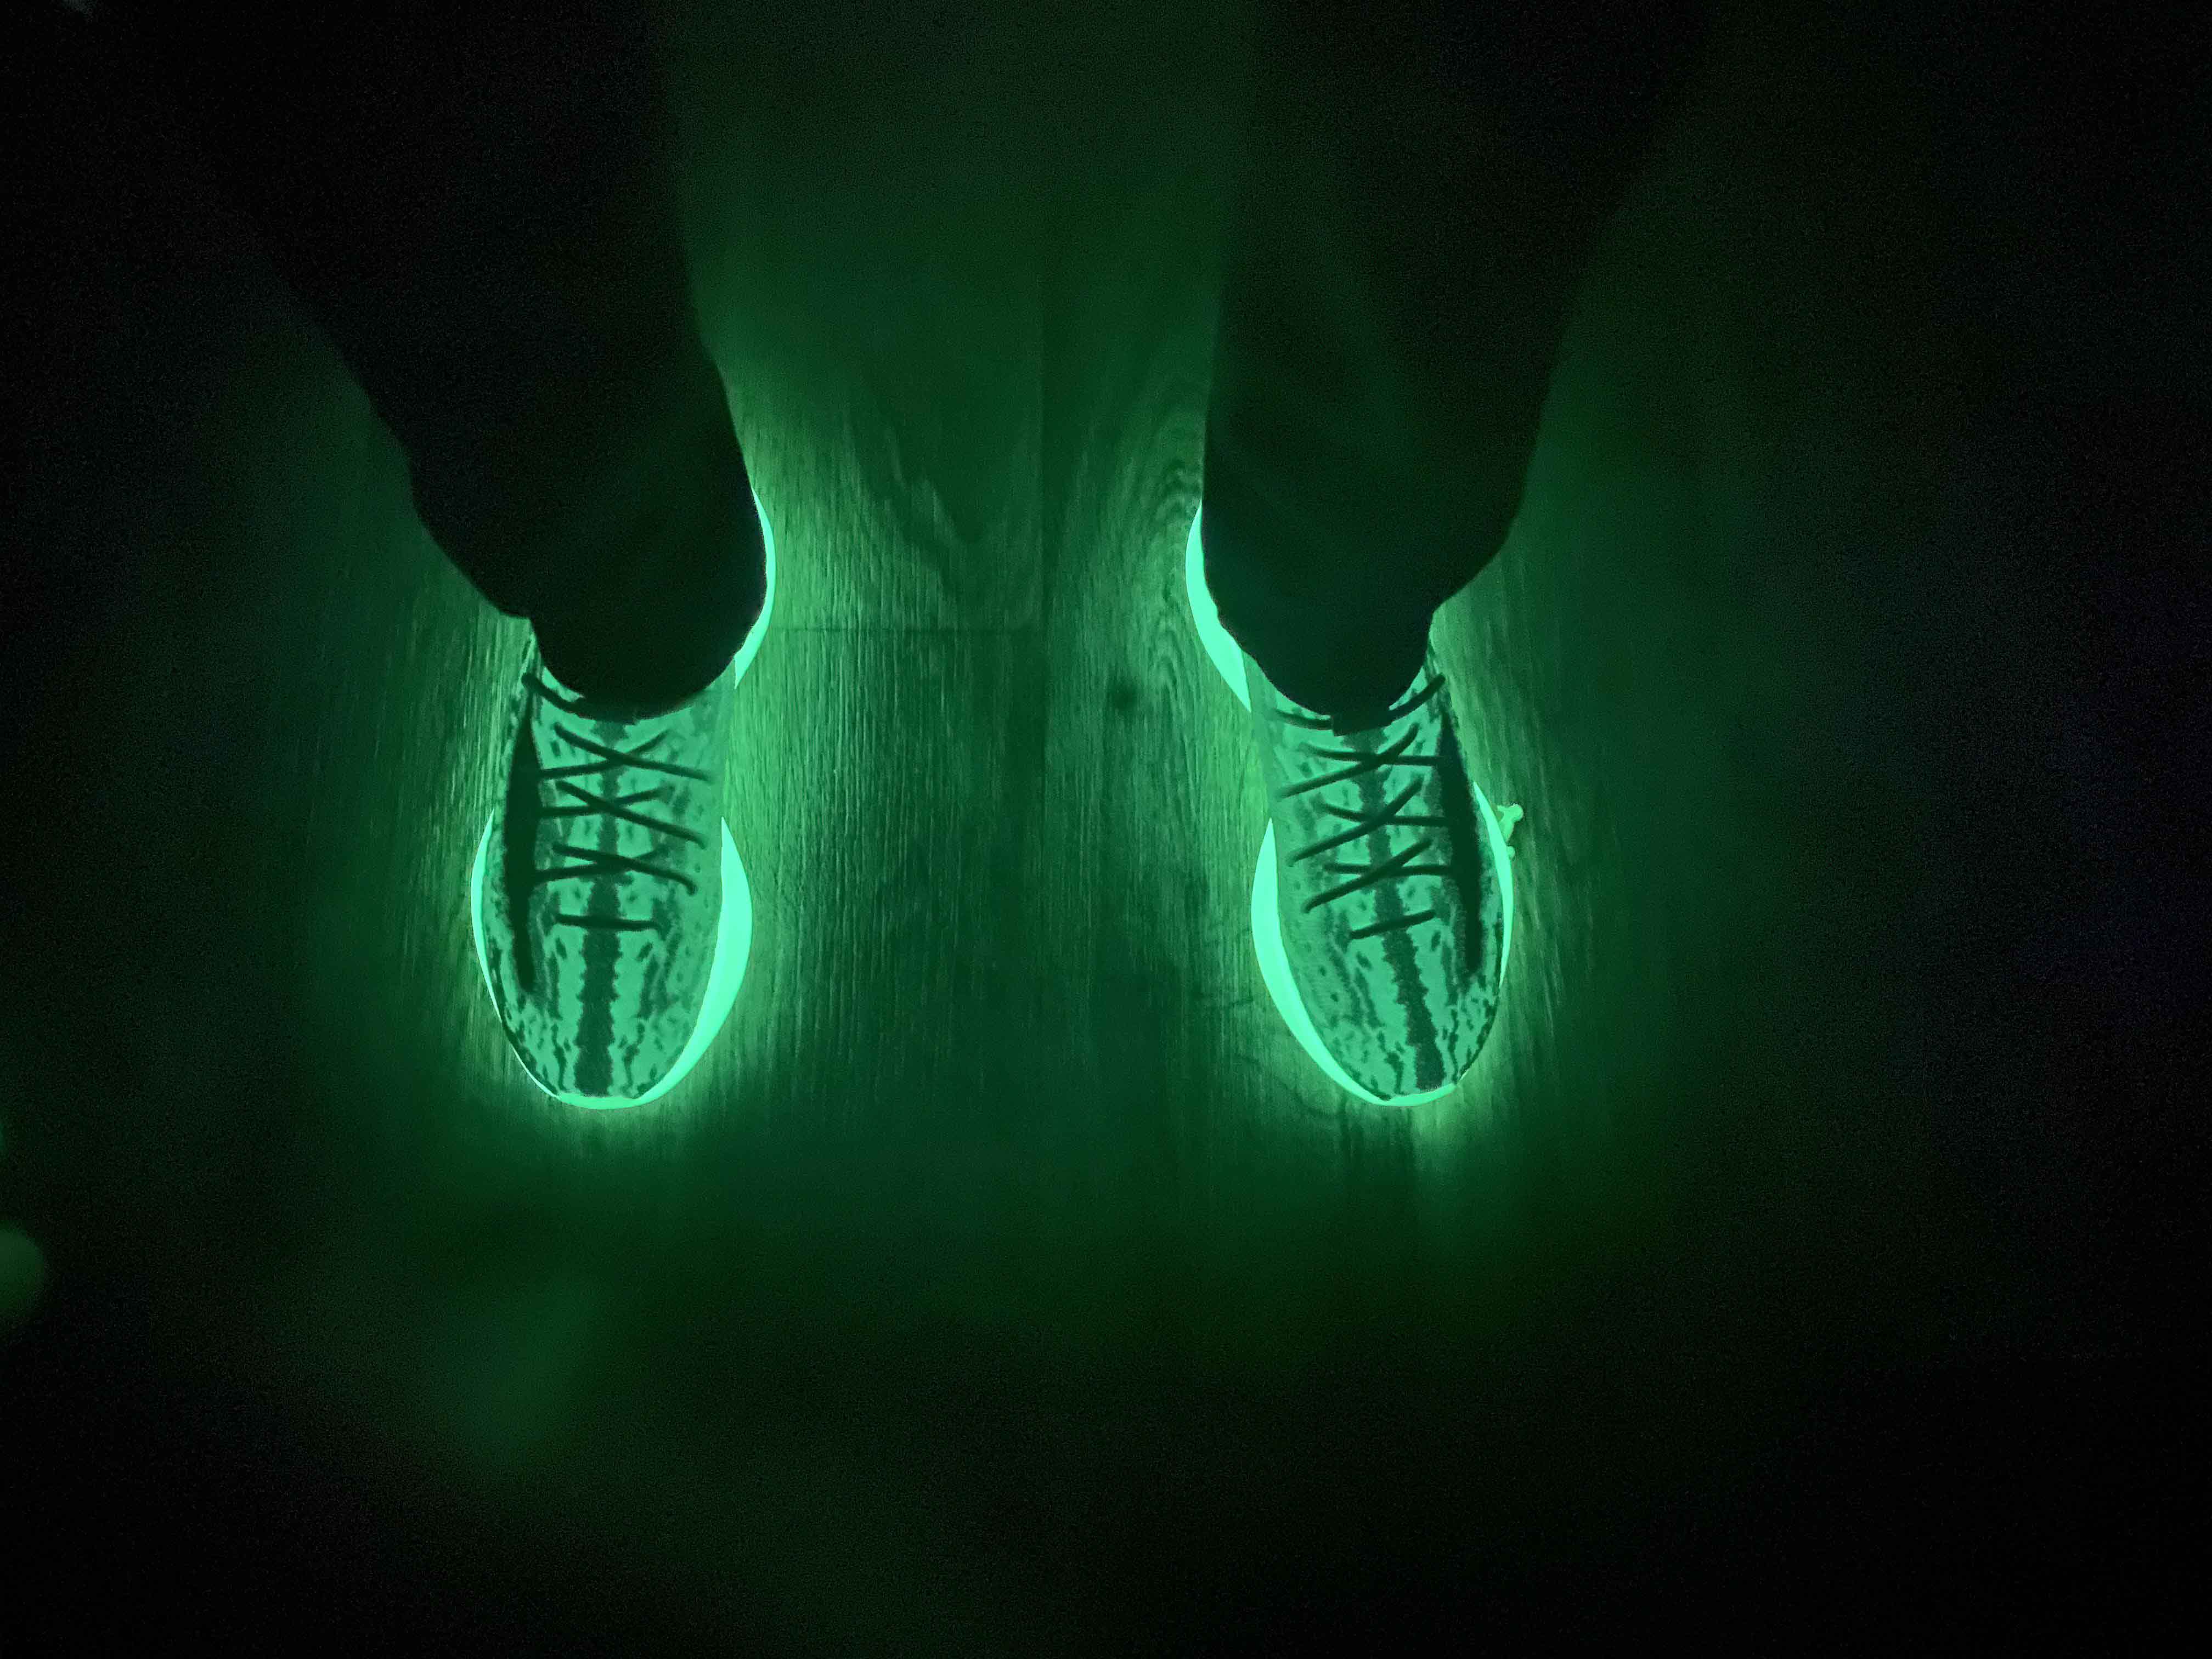 How to make yeezy 380 glow in the dark